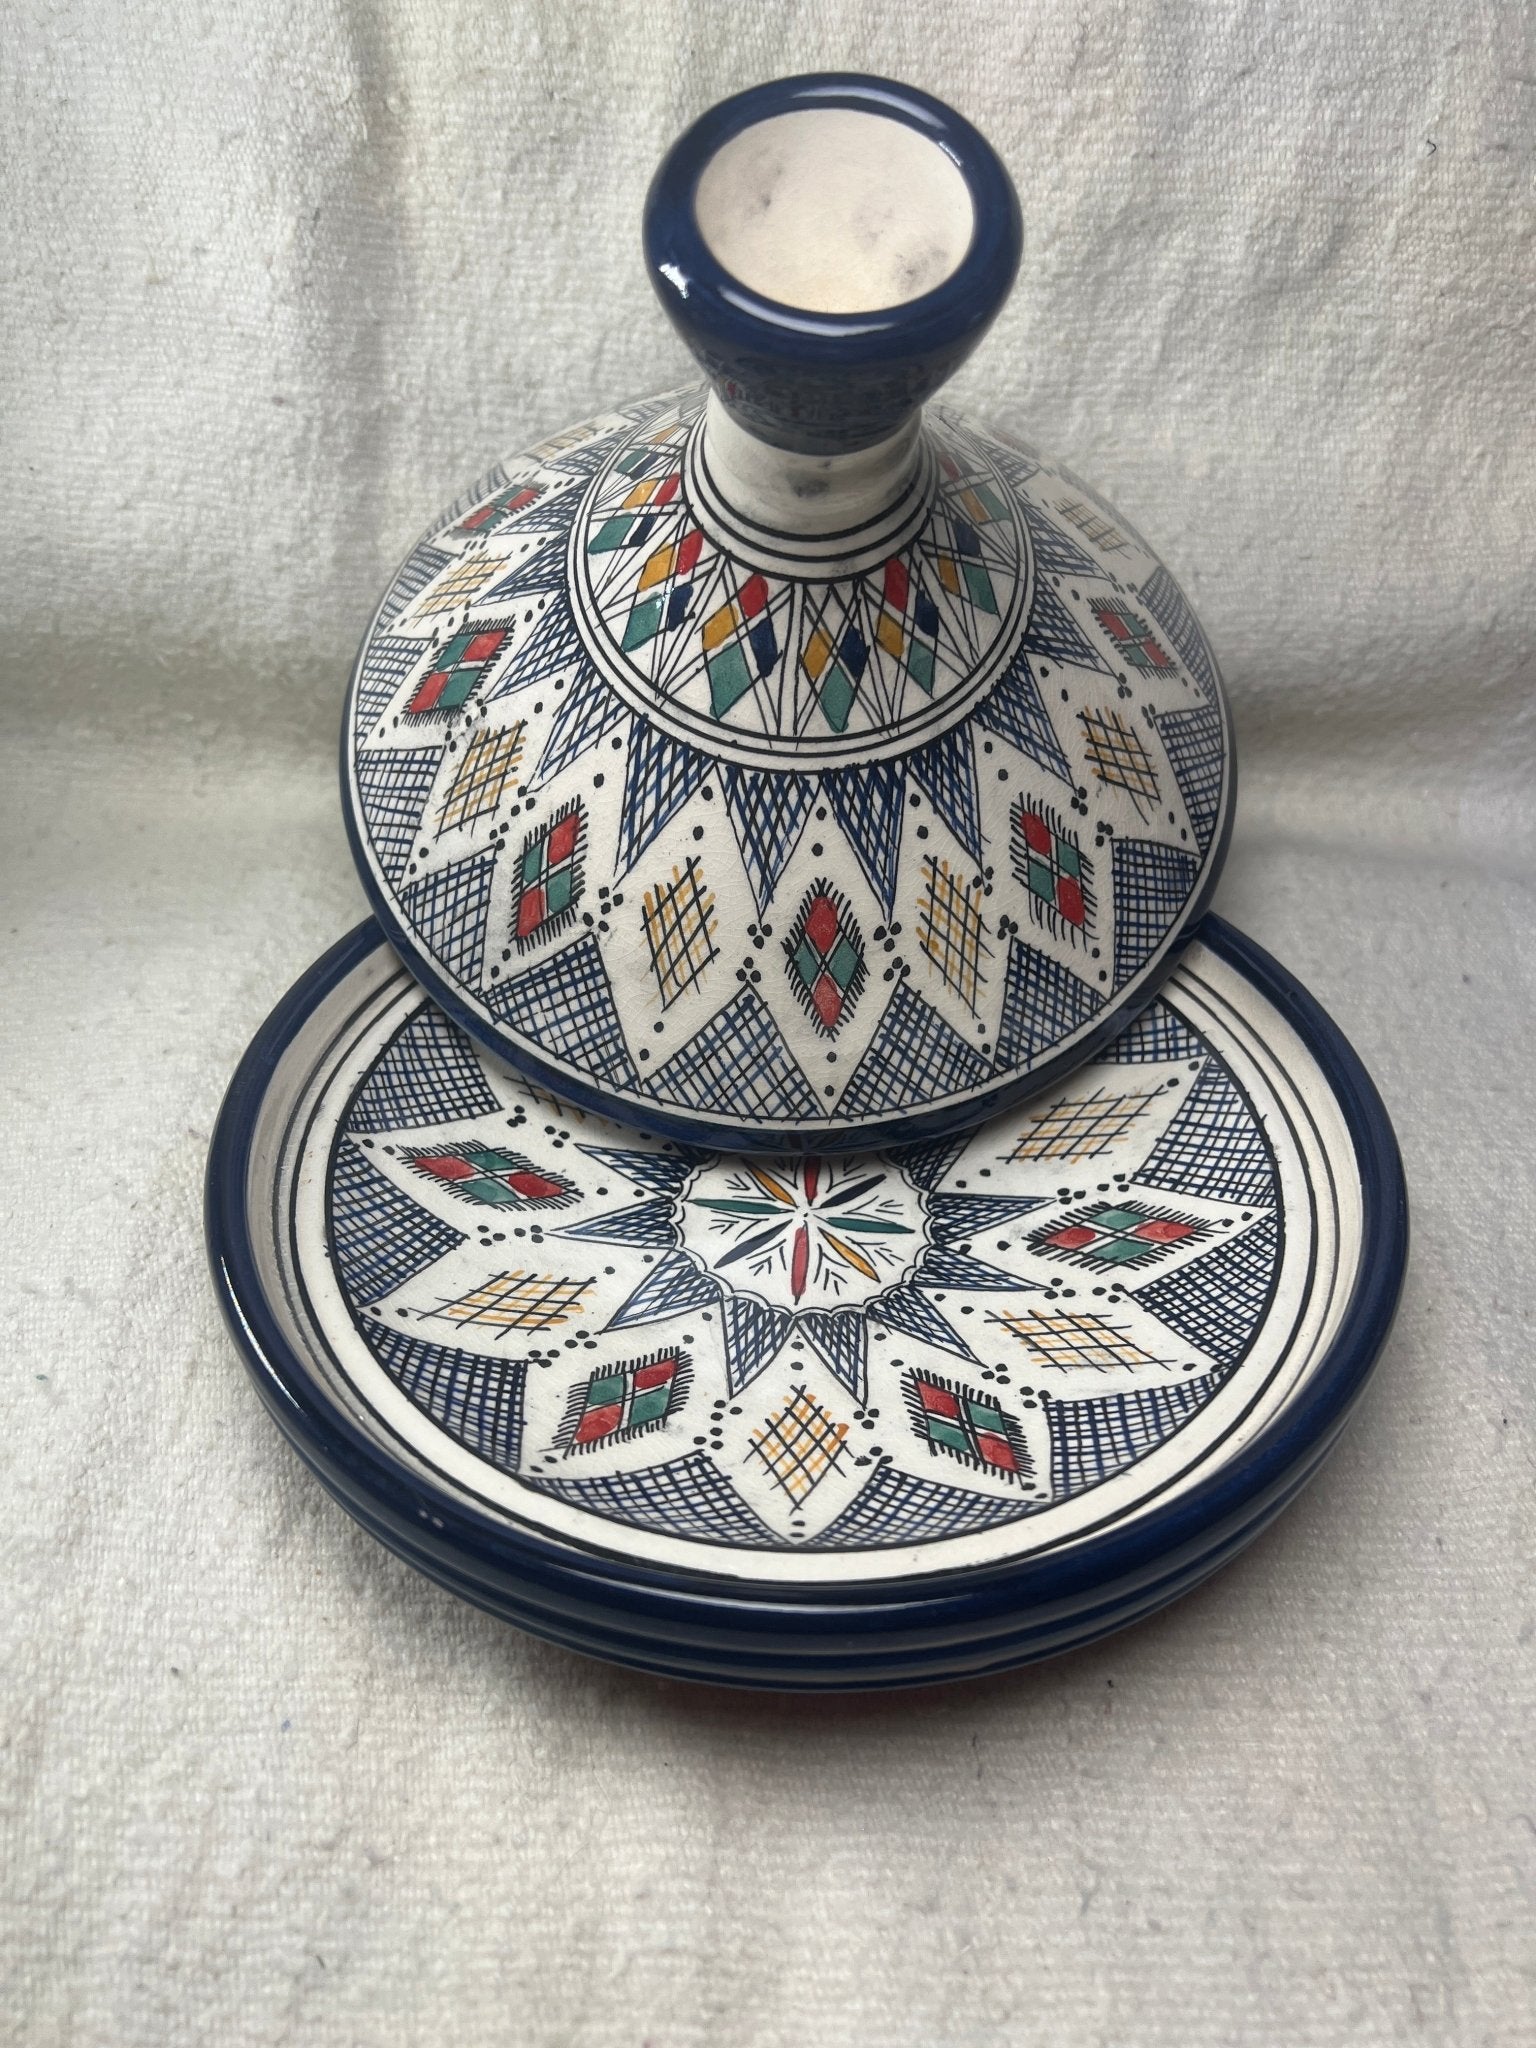 Moroccan Artistry: Handmade Serving Tagine Plate with Lid